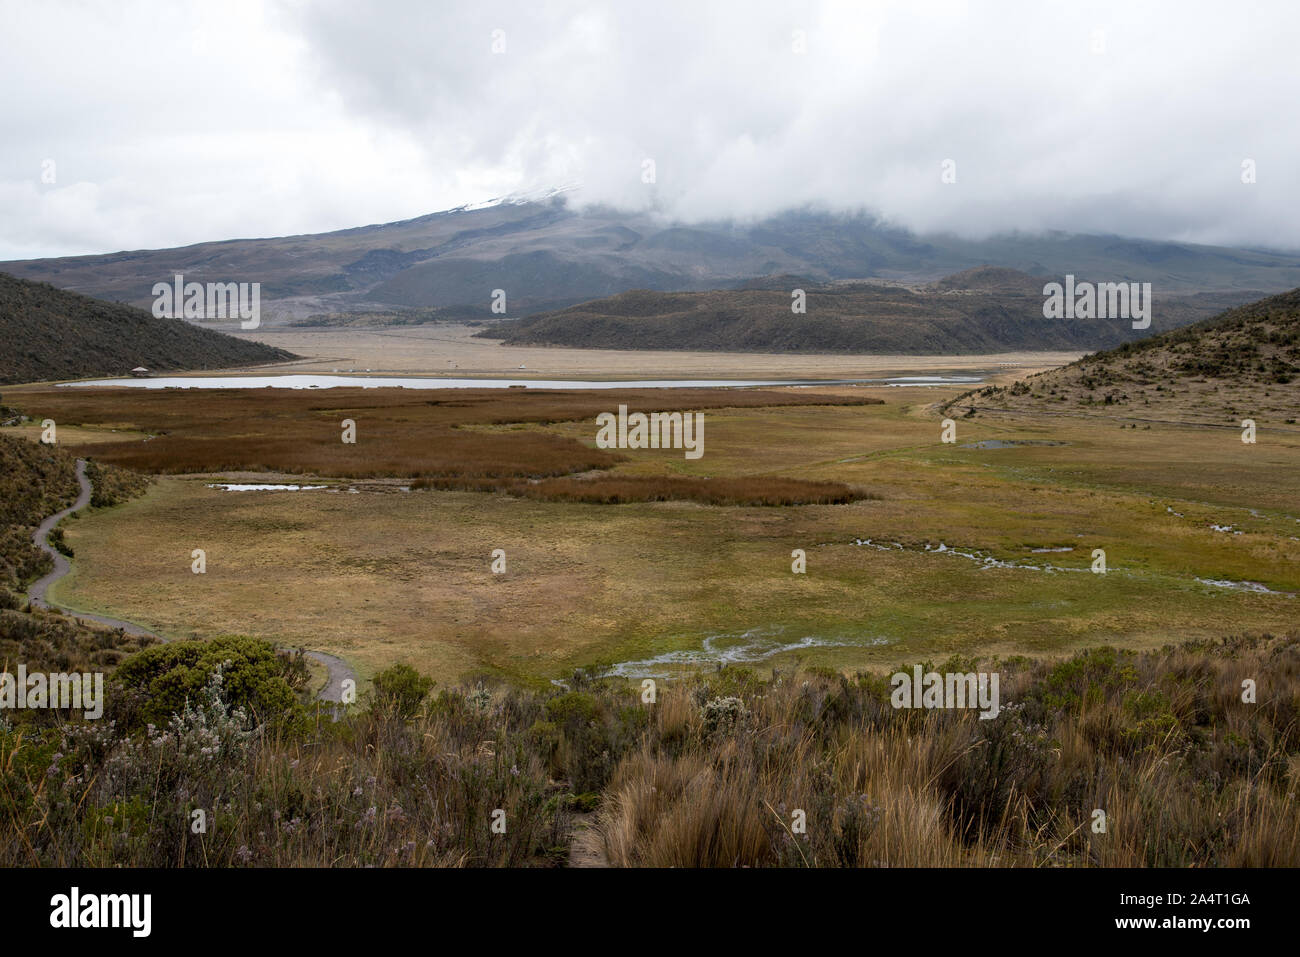 Paramo alpine tundra at the foothills of cloud covered Cotopaxi volcano in Ecuador. Stock Photo